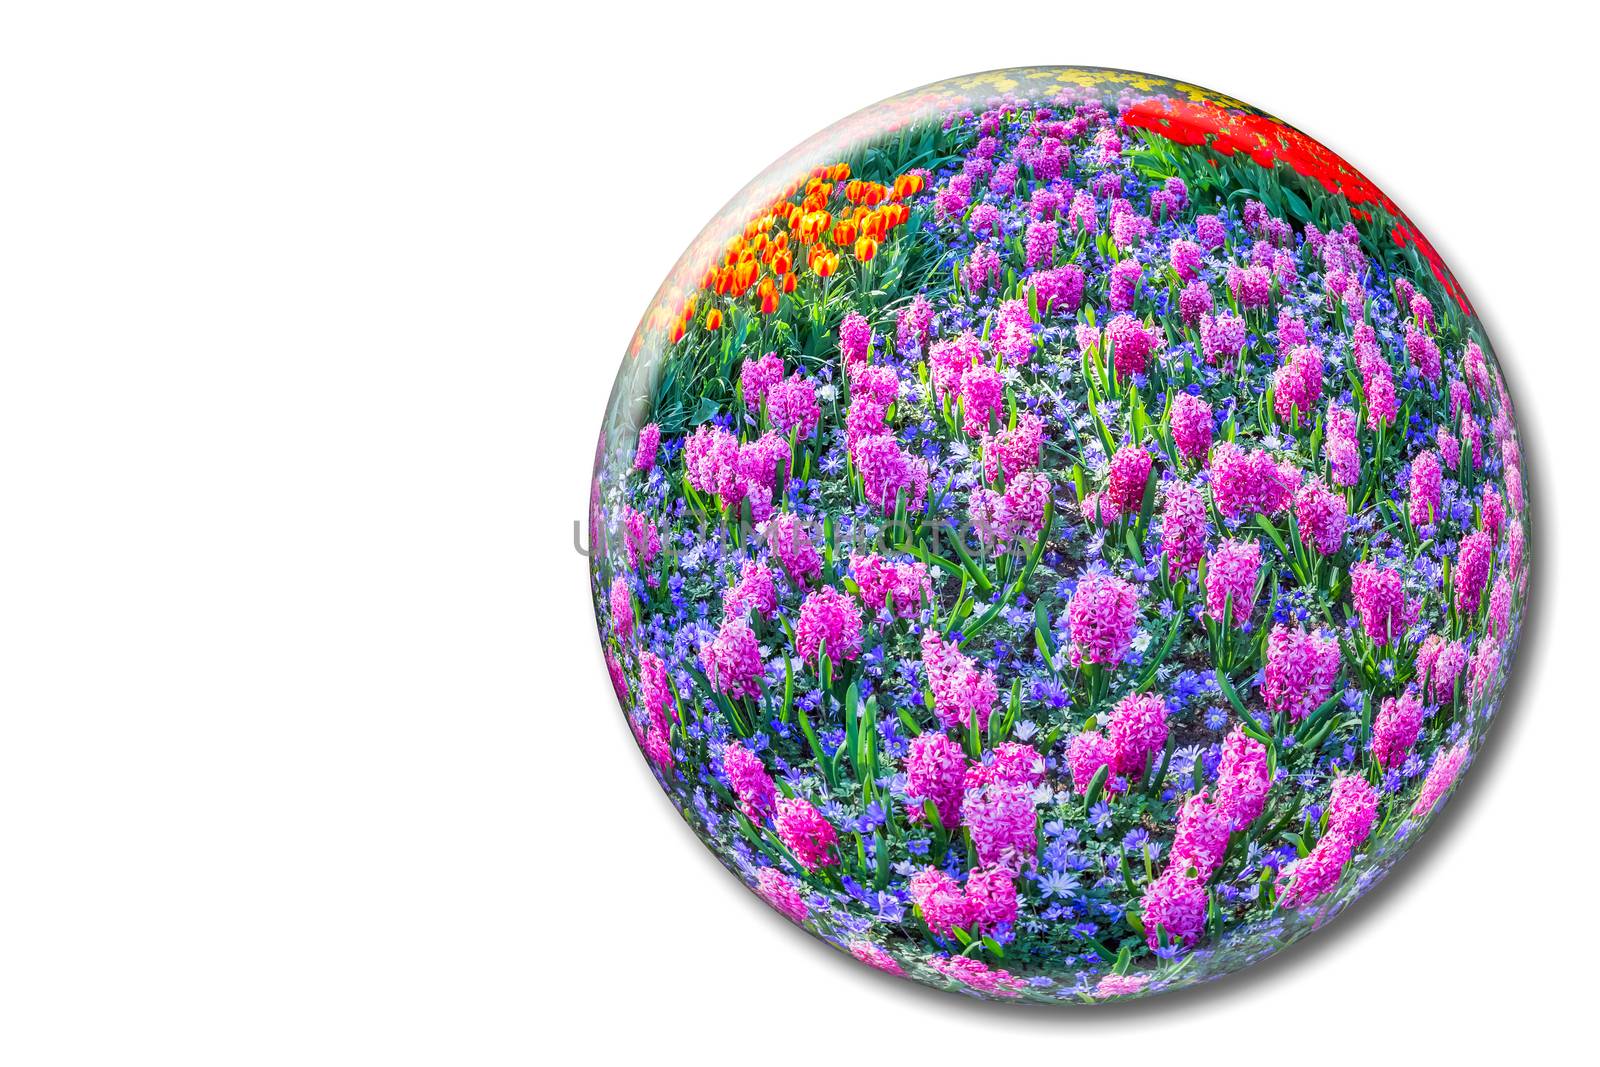 Crystal sphere with pink hyacinths on white background by BenSchonewille